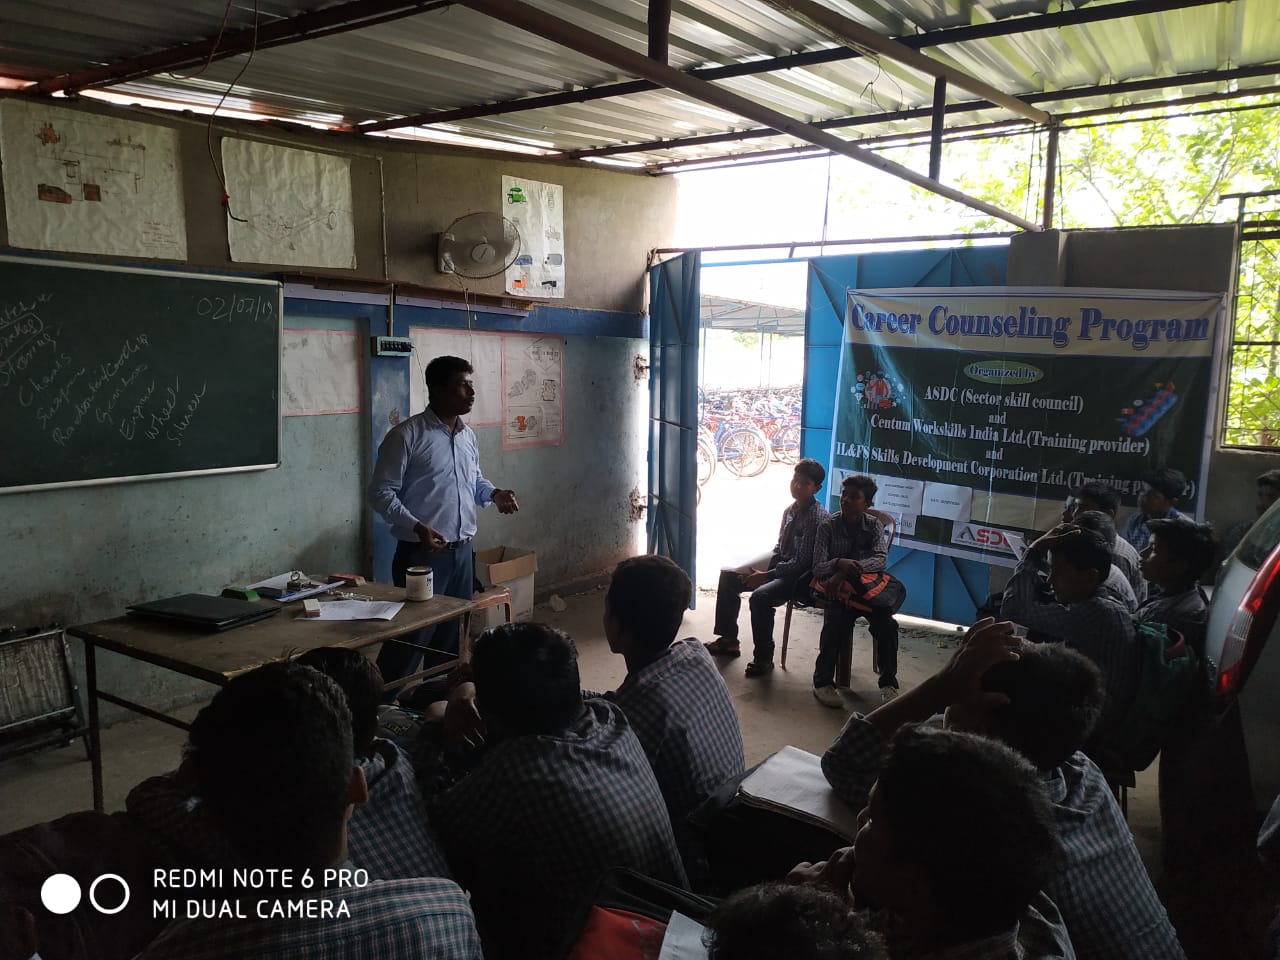 Career counseling program organized by Centum Workskills India Ltd. Industry experts Mr. Bimal Kumar Nandy from Online Equipments delivered his speech in front Students.